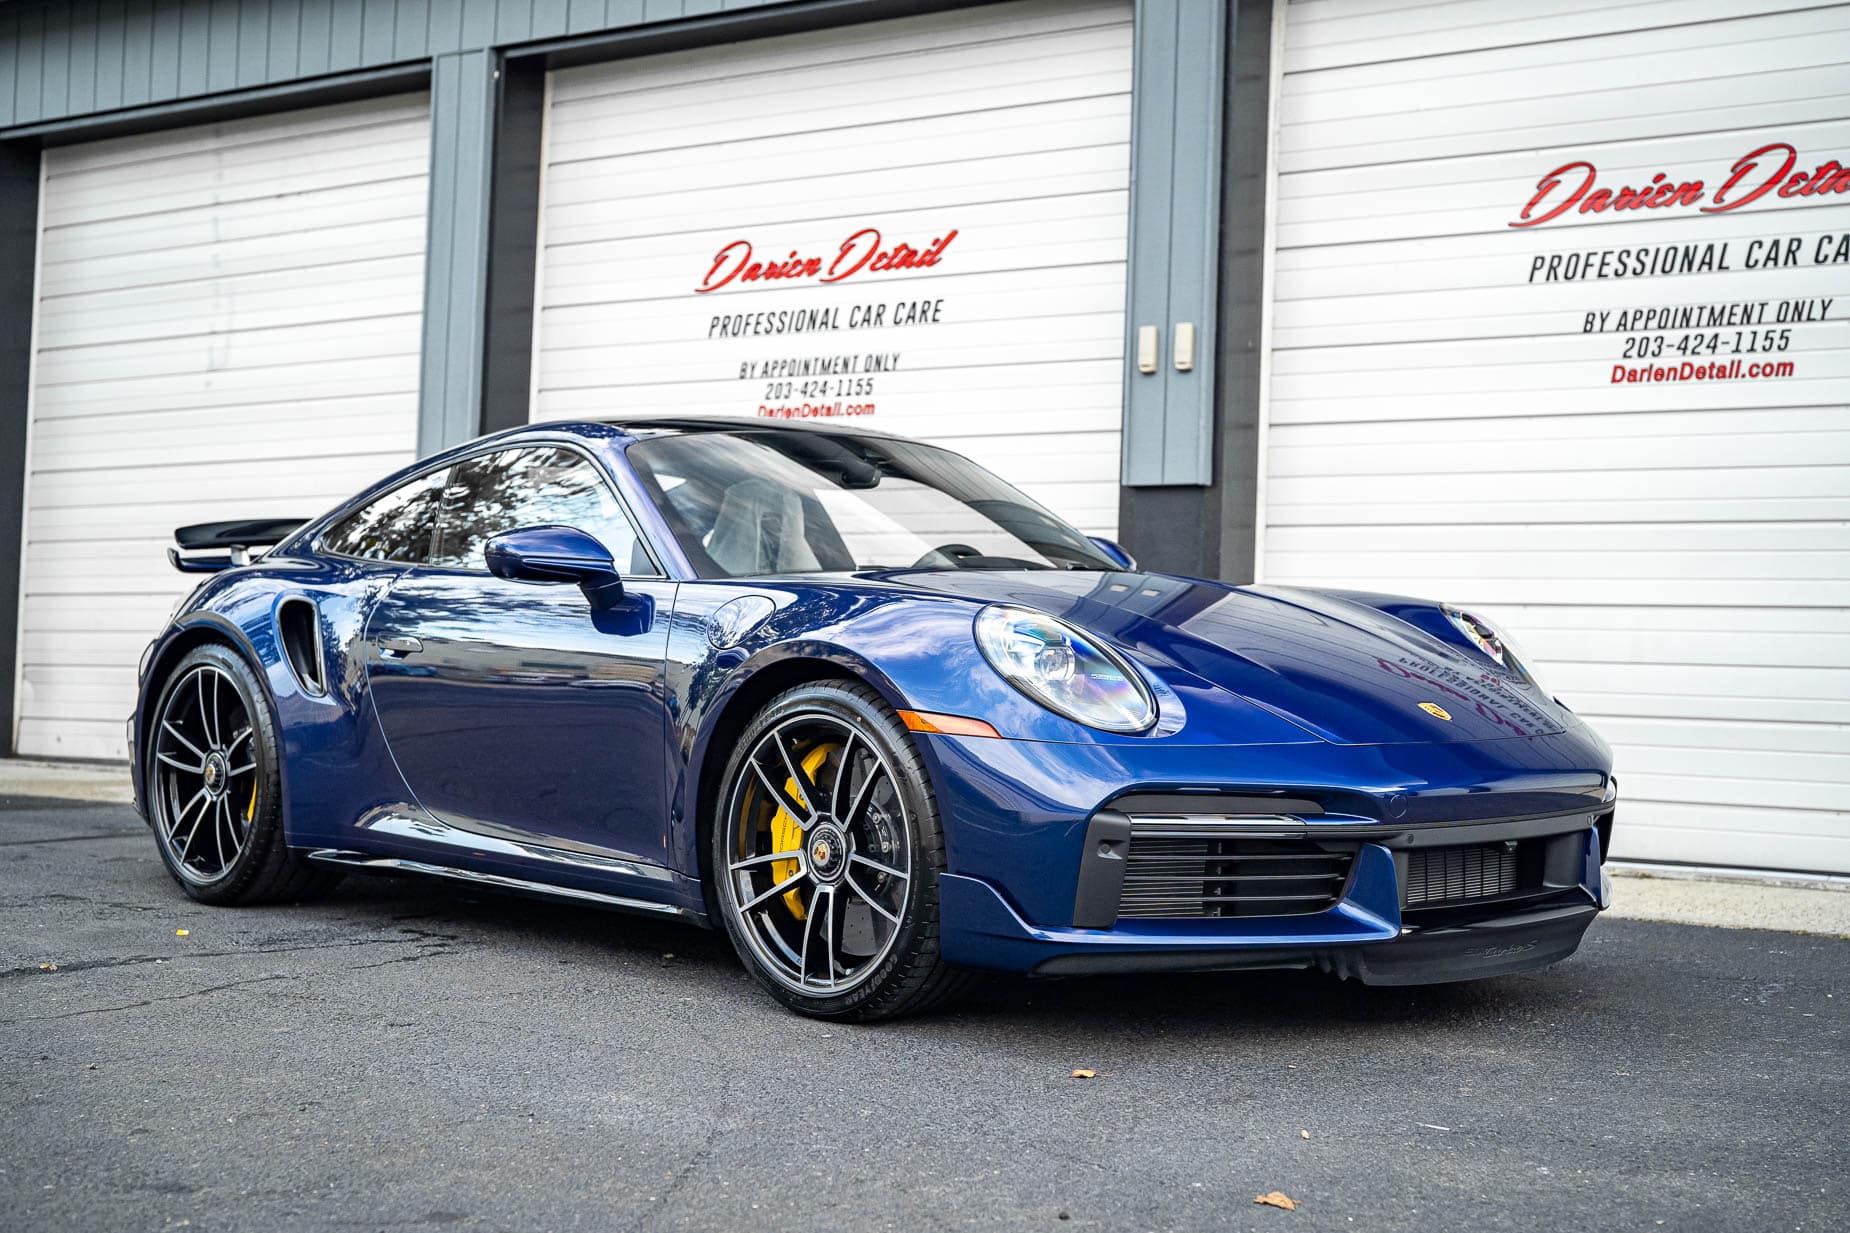 2021 Porsche 911 Turbo S Coupe 992.1 Gentian Blue Metallic Pccb Calipers In Yellow Xpel Paint Protection Film Ppf Ceramic Coating 01